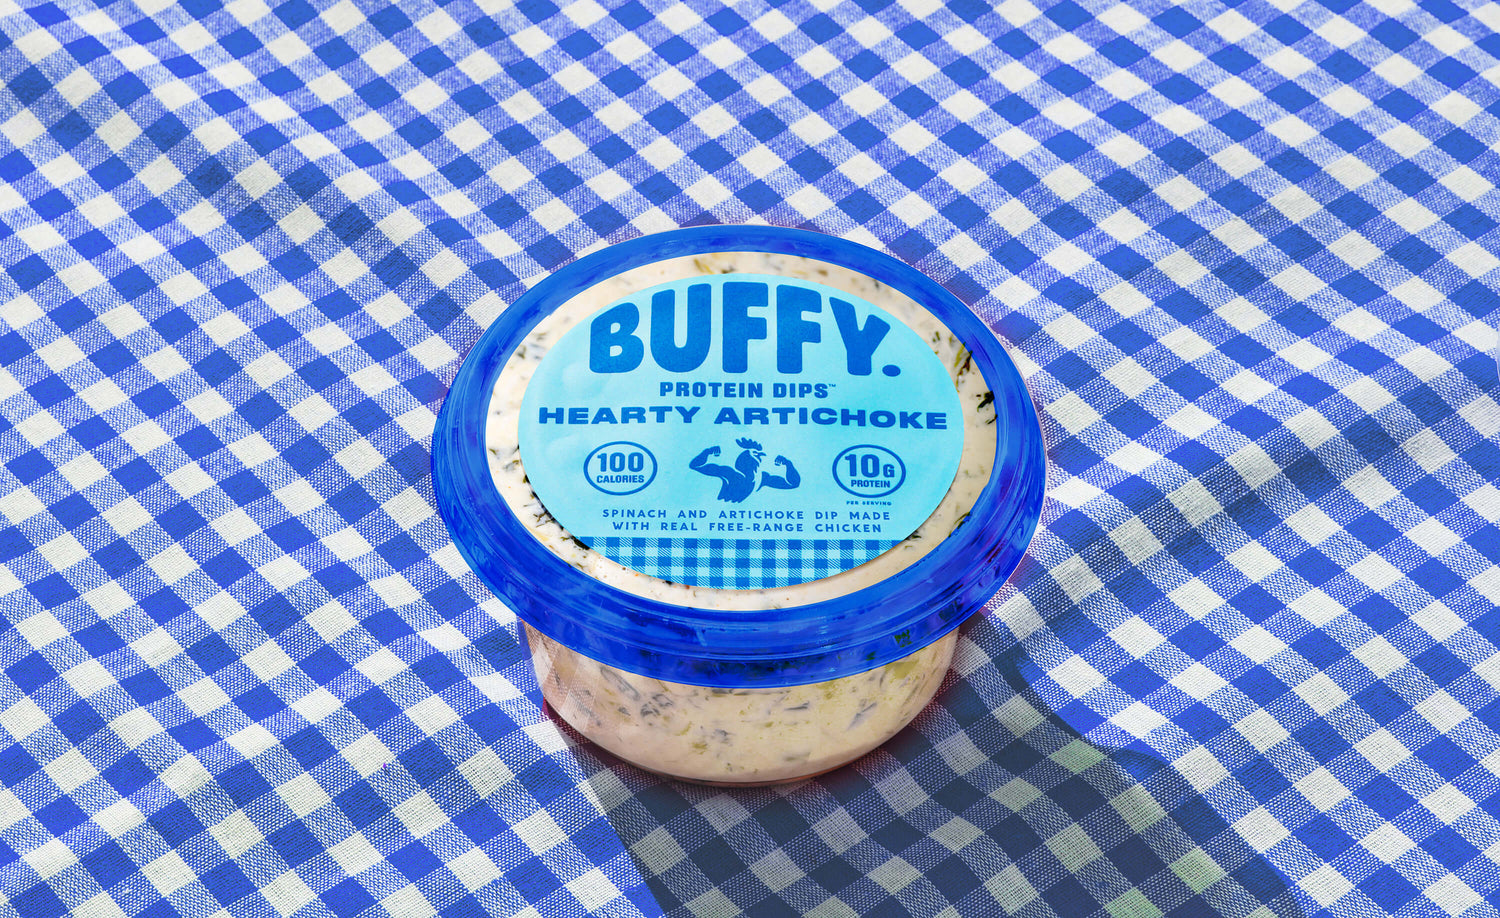 Buffy Protein Dips Hearty Artichoke sitting on a blue and white checkered picnic blanket